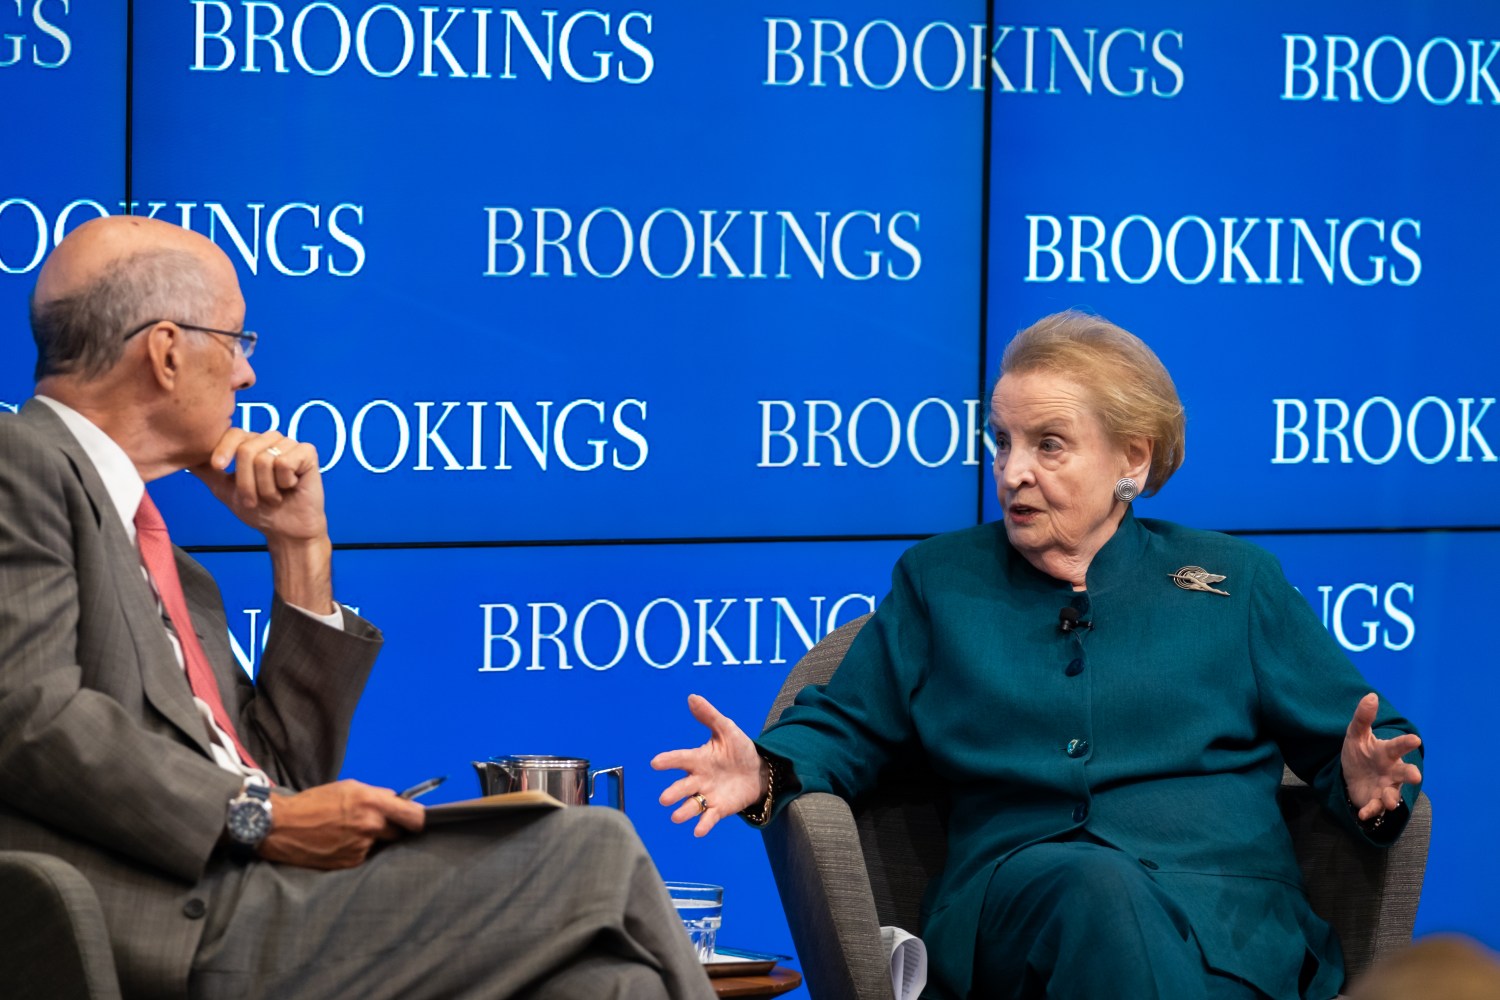 Strobe Talbott and Madeleine Albright at a Brookings event on September 7 2018.